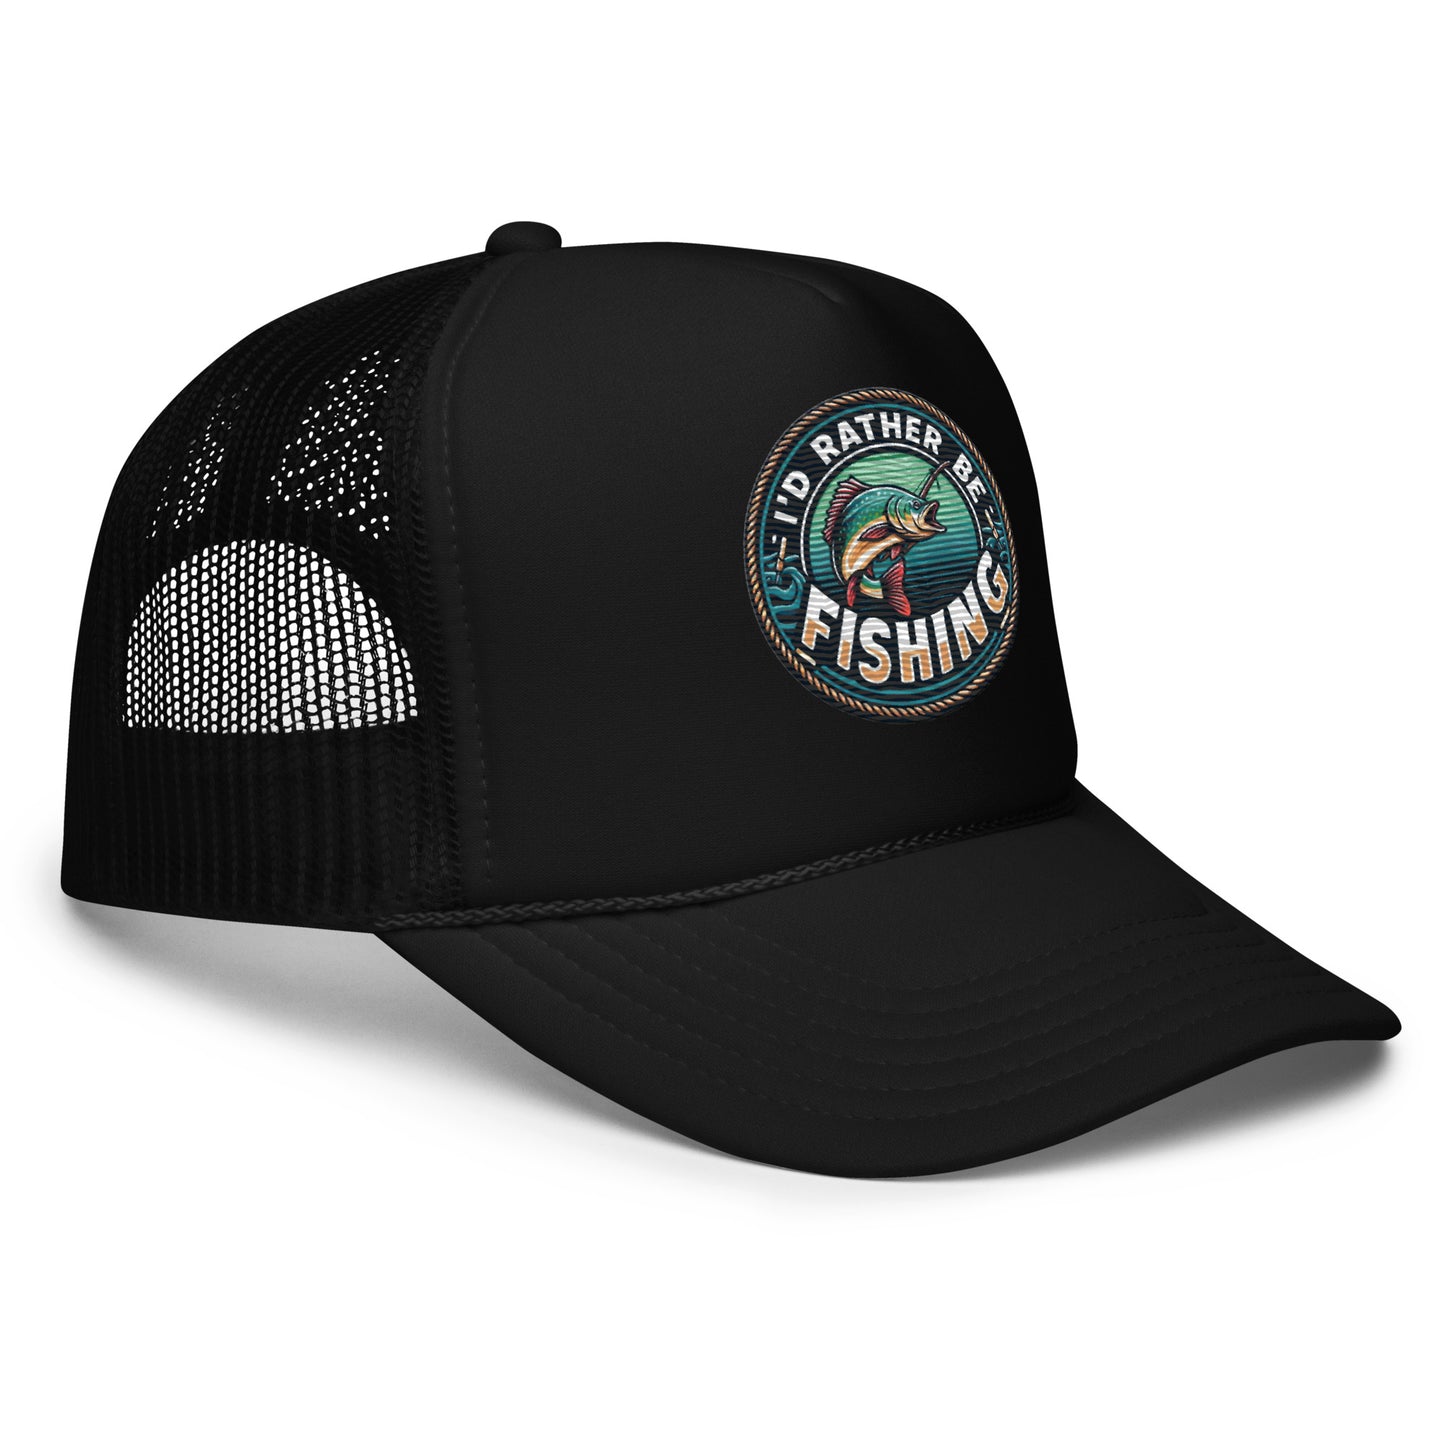 I'd Rather Be Fishing Embroidered Patch Otto Foam Trucker Hat